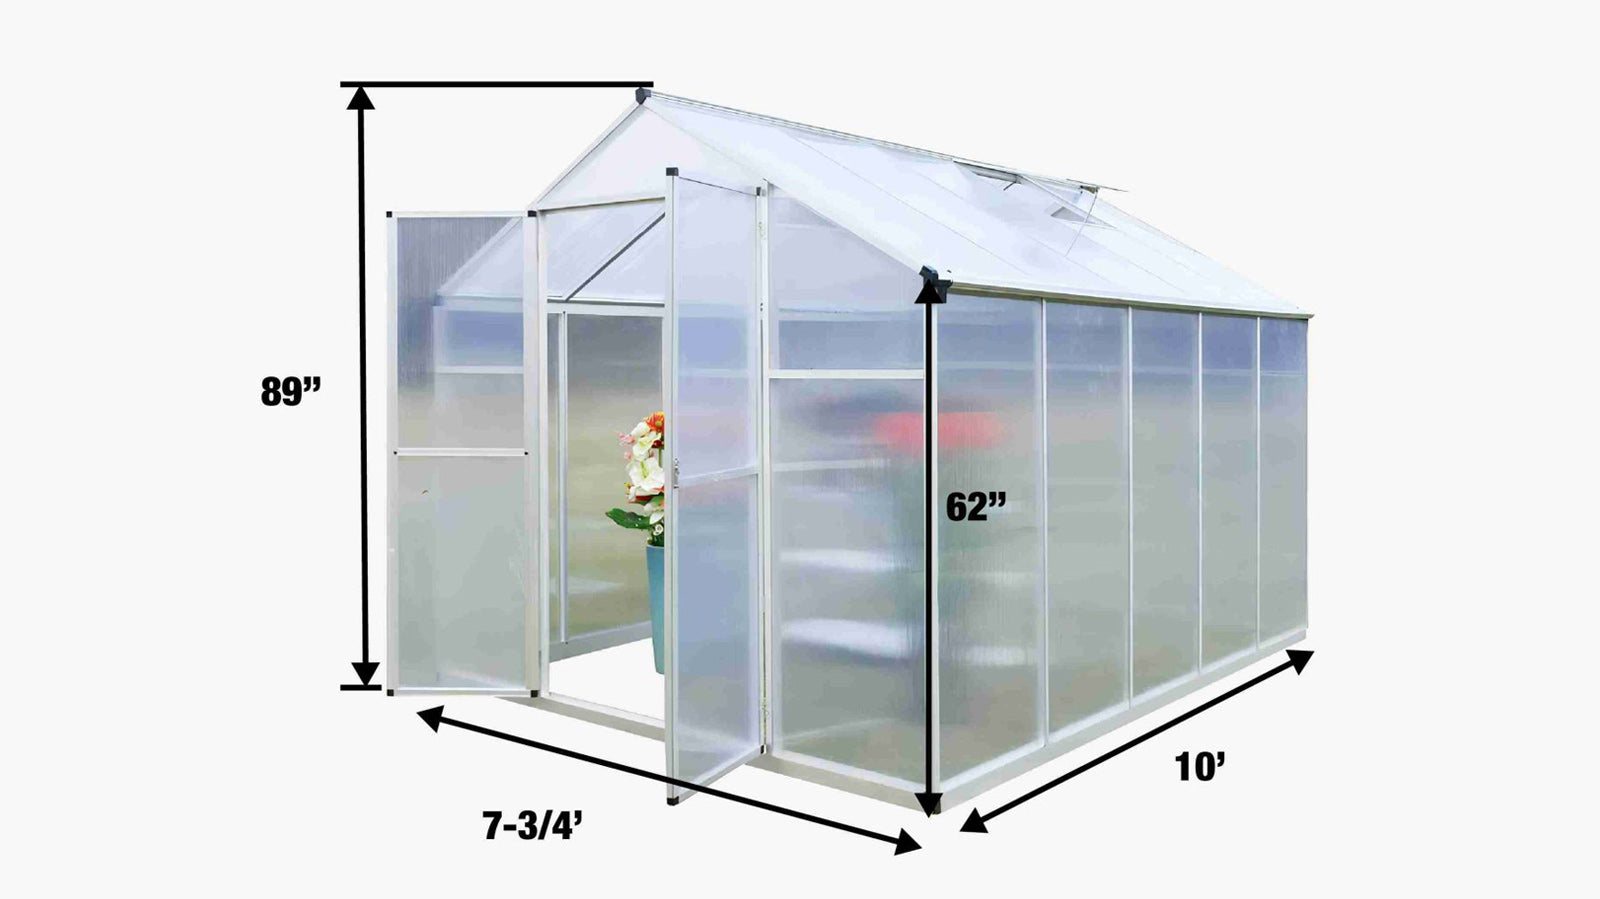 TMG Industrial 8' x 10' Aluminum Frame Greenhouse w/4 mm Twin Wall Polycarbonate Panels, UV Protected Panels, TMG-GH810-specifications-image